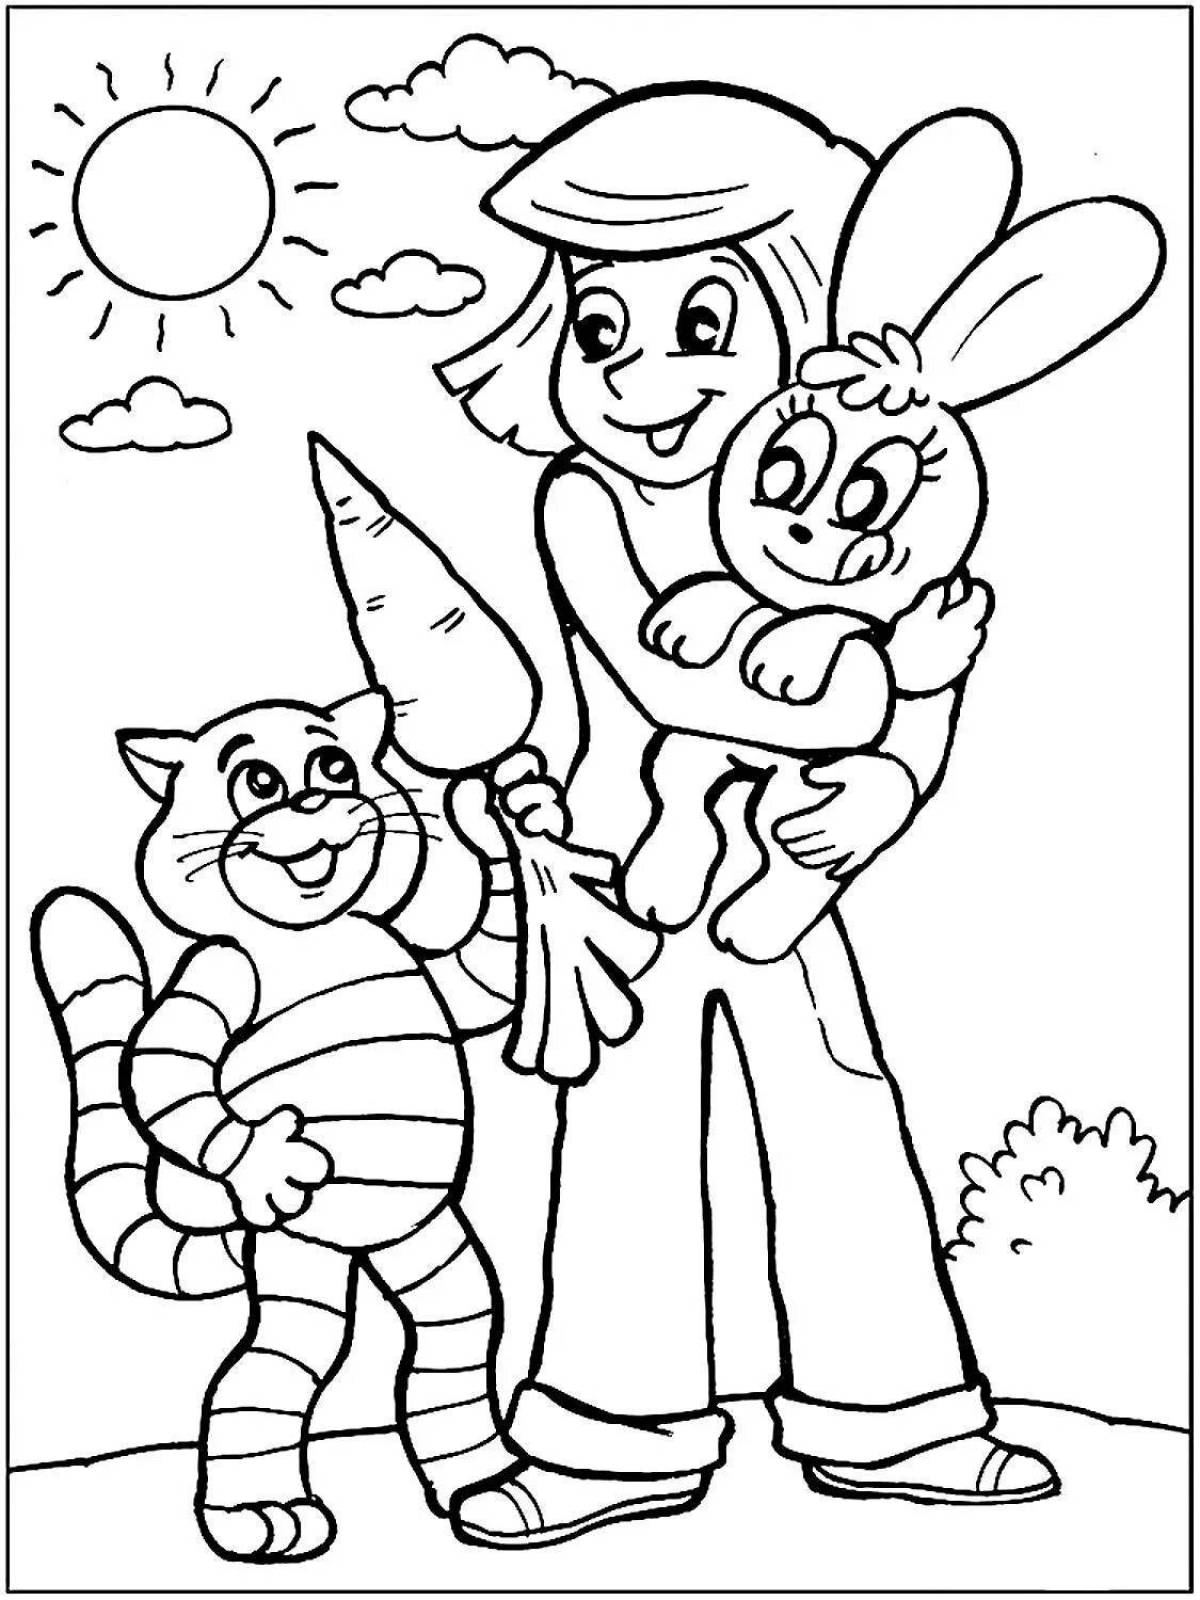 Fun cartoon characters coloring for 6-7 year olds